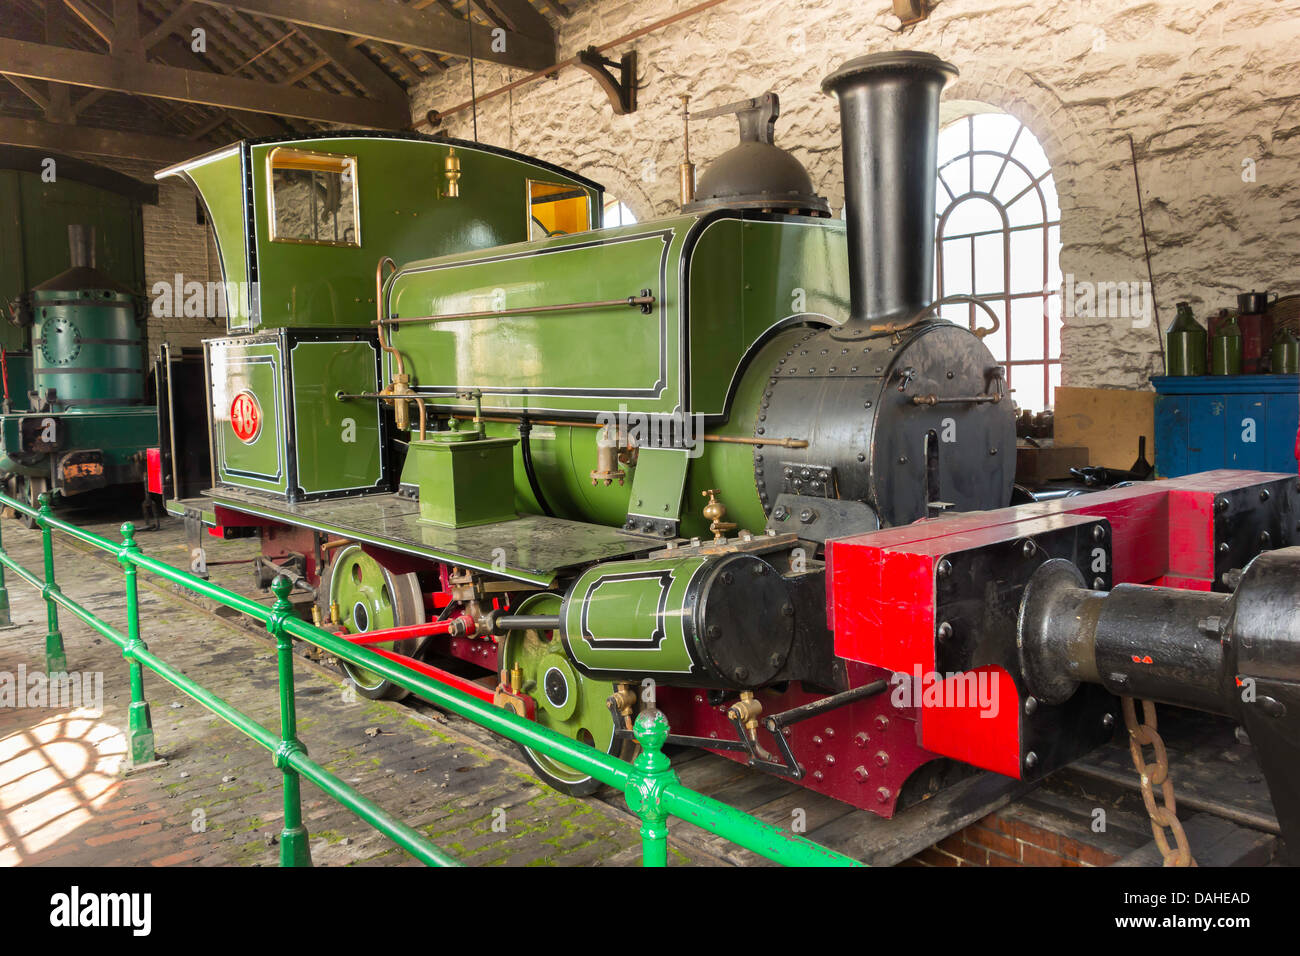 Restored steam locomotive No. 18 built in 1877, which worked at Seaham docks for 93 years, at Beamish Museum of Northern Life Stock Photo